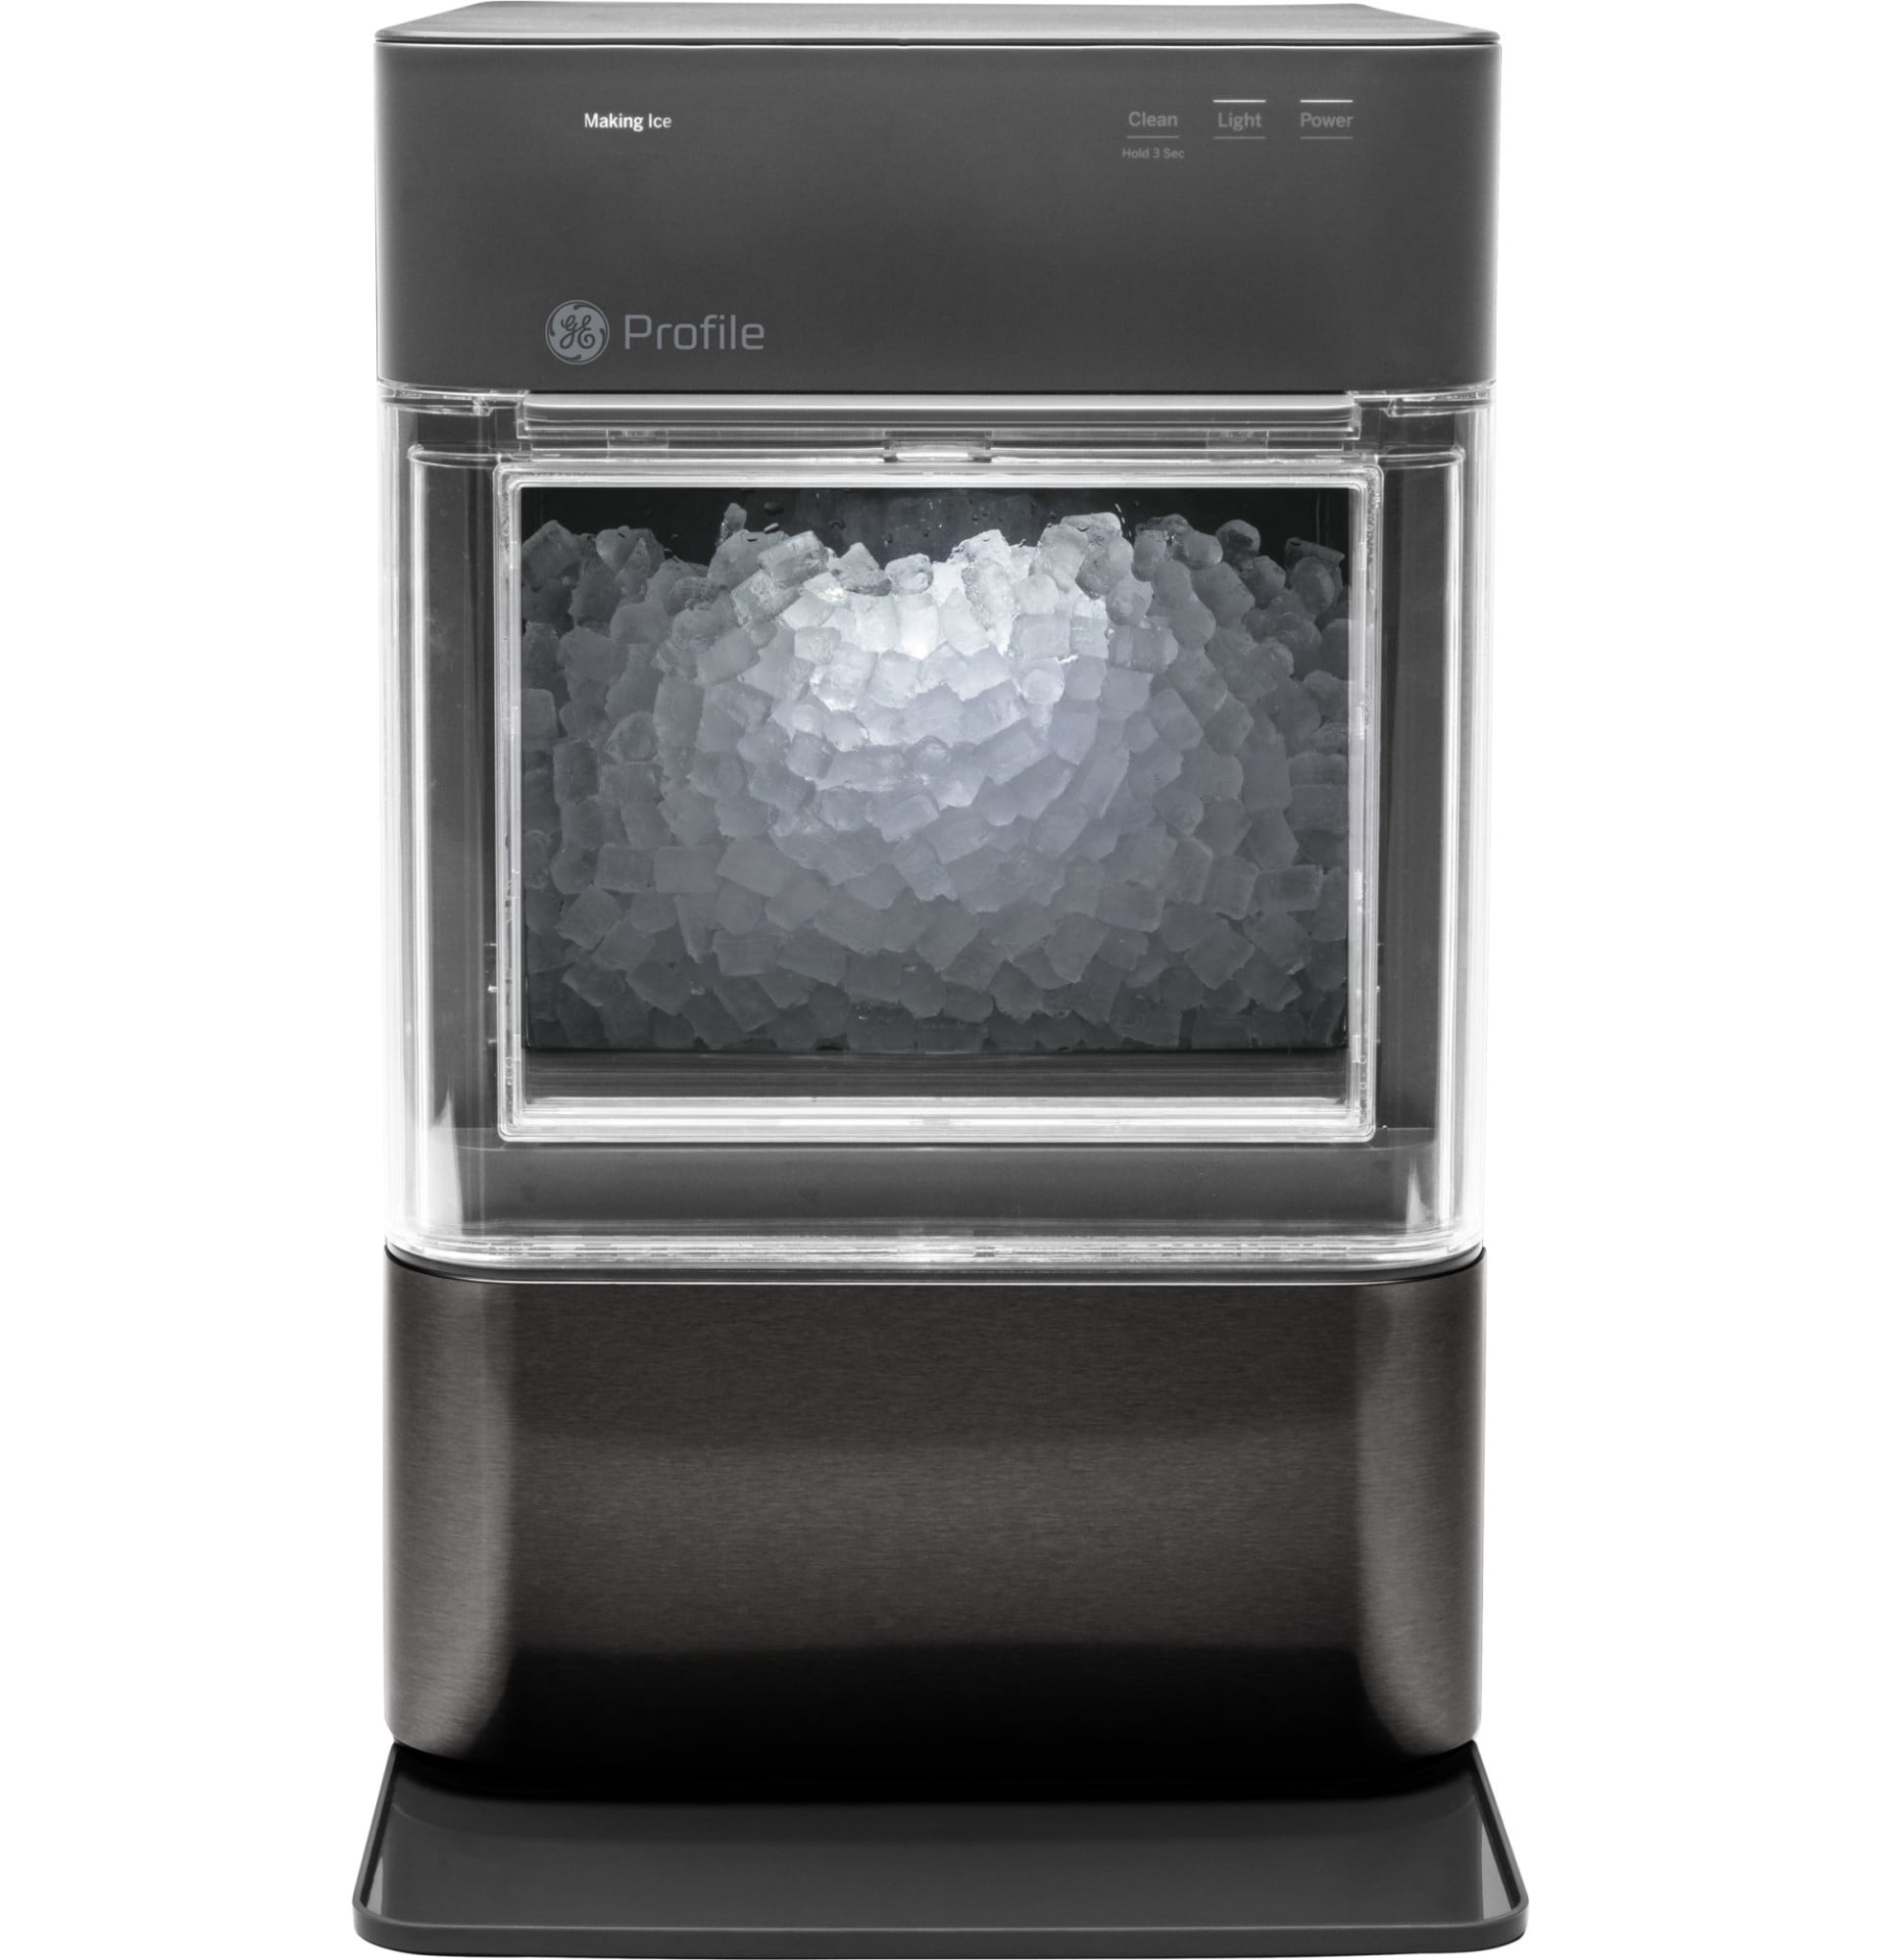  Nugget Ice Maker Countertop, Paris Rhône Sonic Ice Maker, Make  30lb Nugget Ice per Day, Electric Pebble Ice Maker with 4.8lb Ice Bin and  Scoop for Home/Office/Bar/RV/Party : Appliances